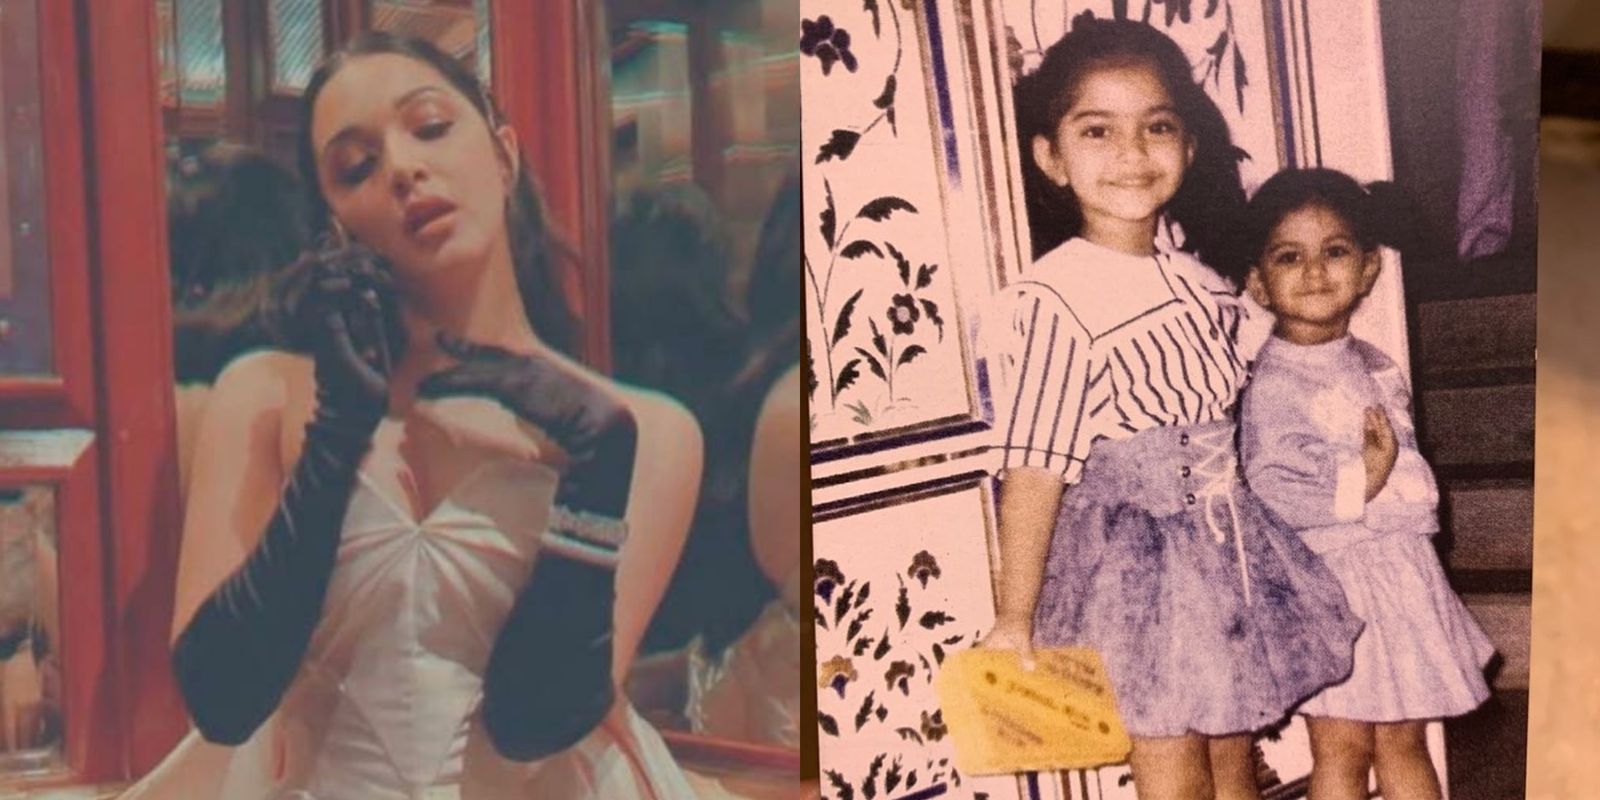 Kiara Advani Dresses Up For Video Calls Amid Lockdown; Rhea Shares An Adorable Throwback Picture With Sonam Kapoor